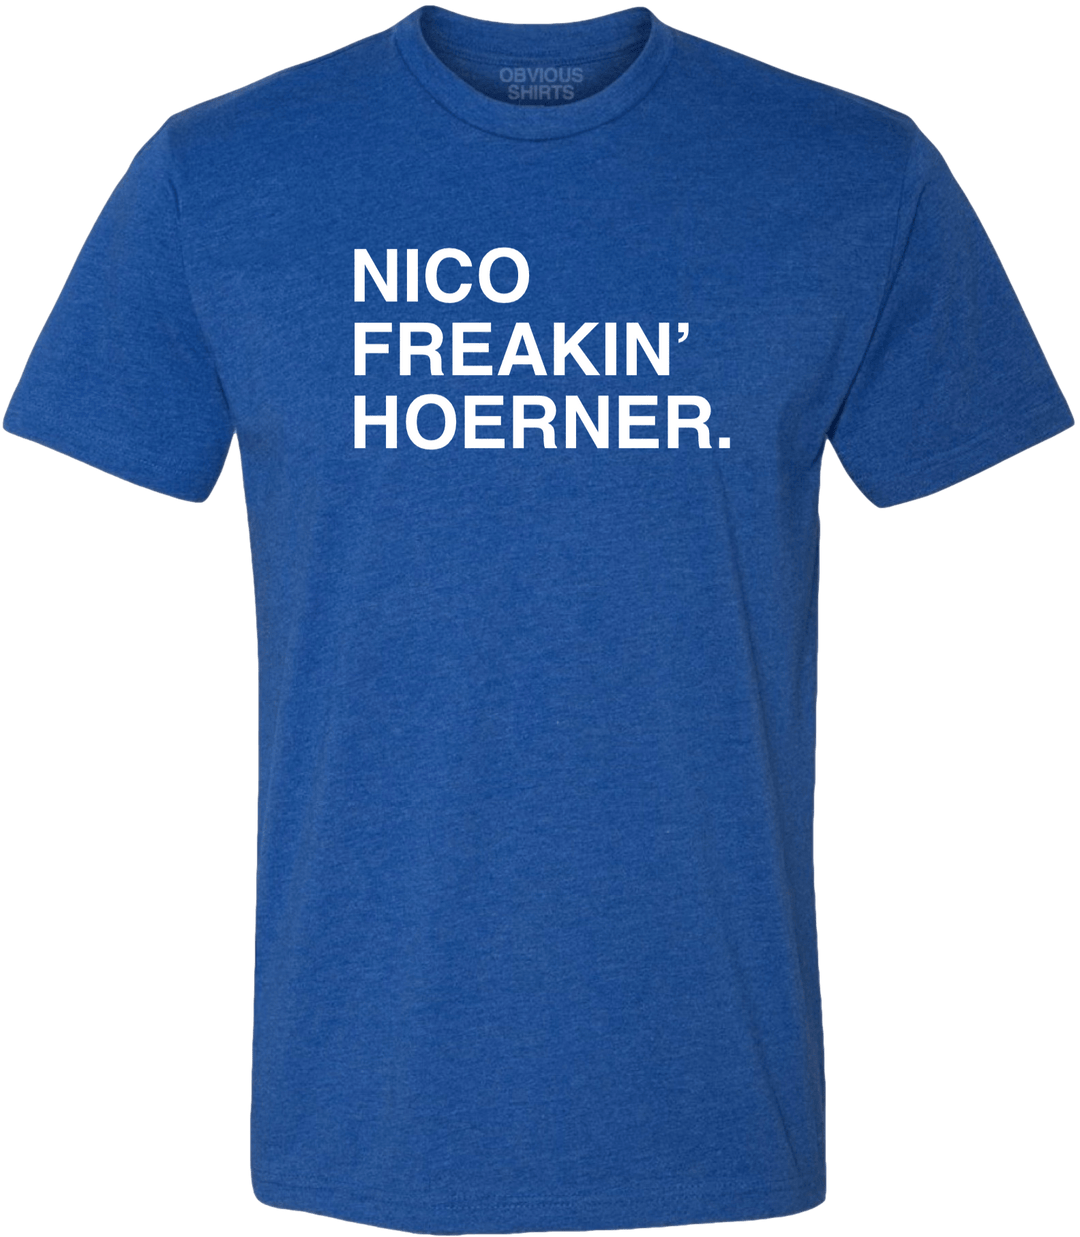 NICO FREAKIN' HOERNER. - OBVIOUS SHIRTS